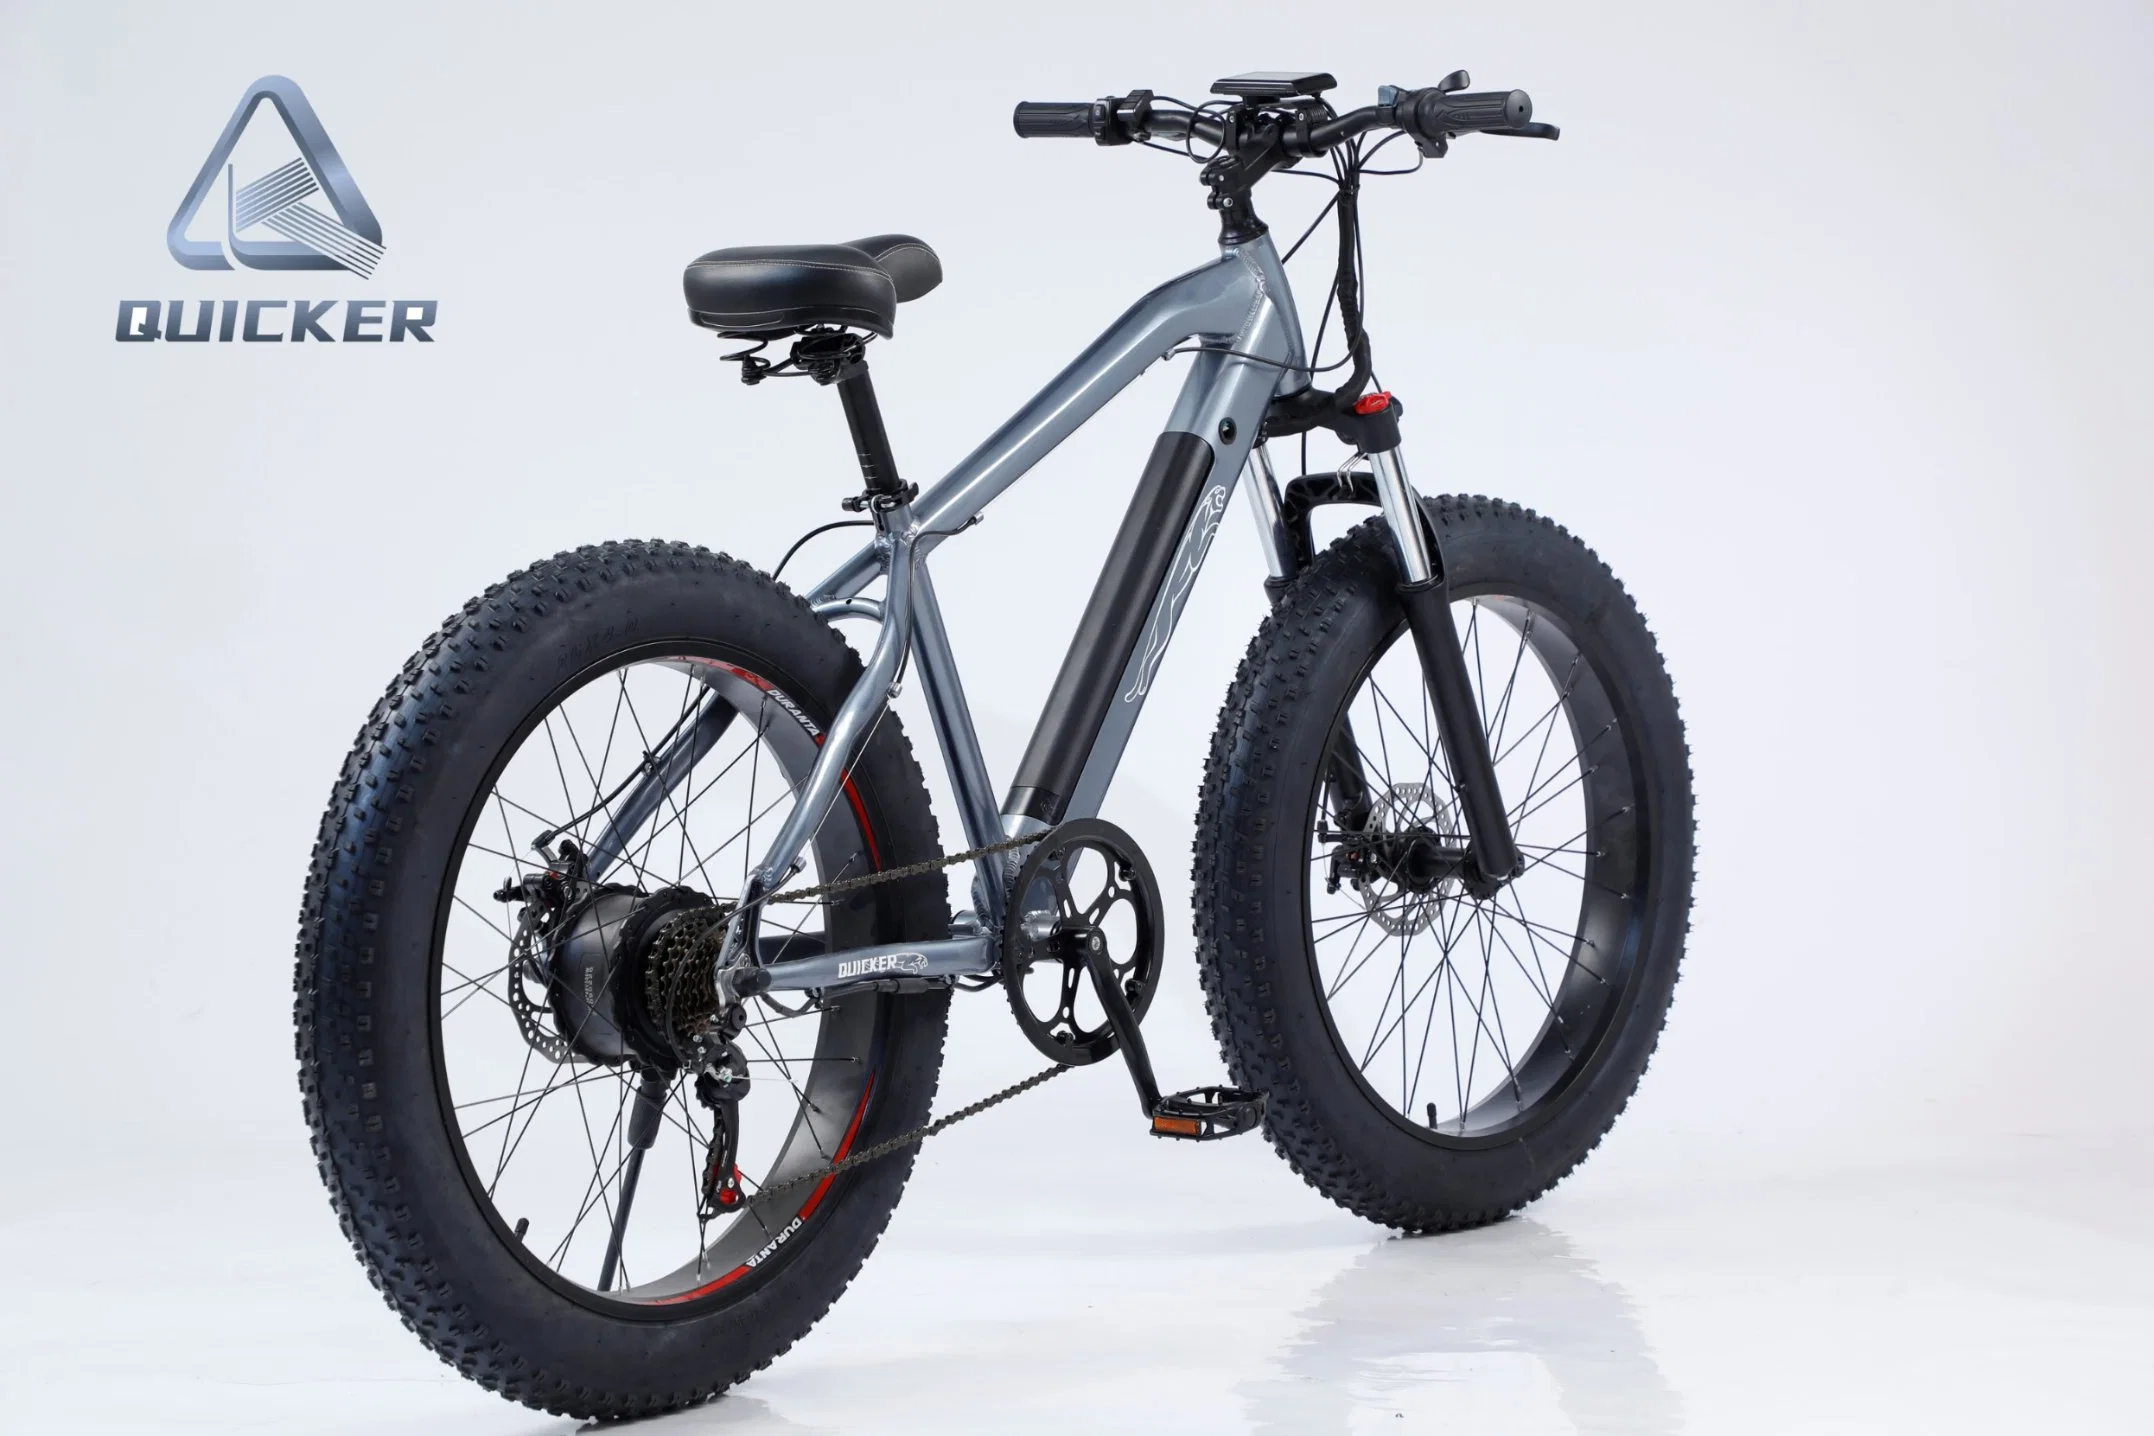 Three-Wheel off Road Tire 1000W/2000W 20ah Battery 3 Wheel Electric Motorcycles Adult EEC Electric Scooter Citycoco